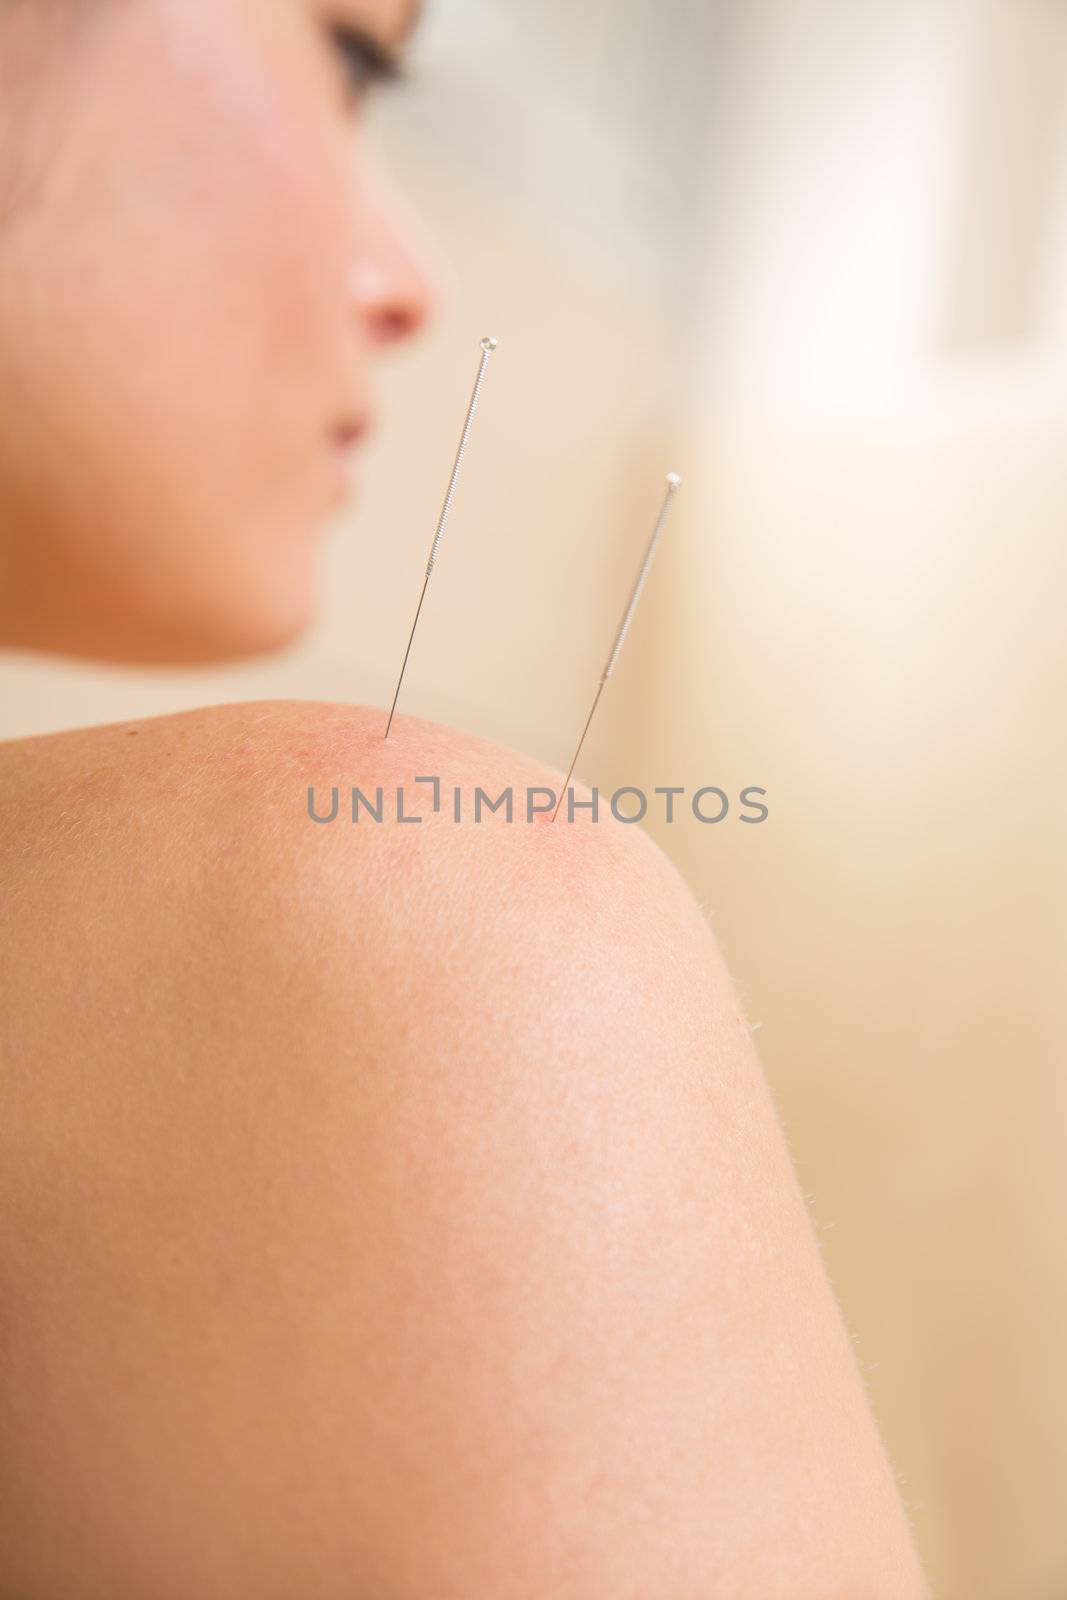 Acupuncture needle pricking on woman shoulder by lunamarina